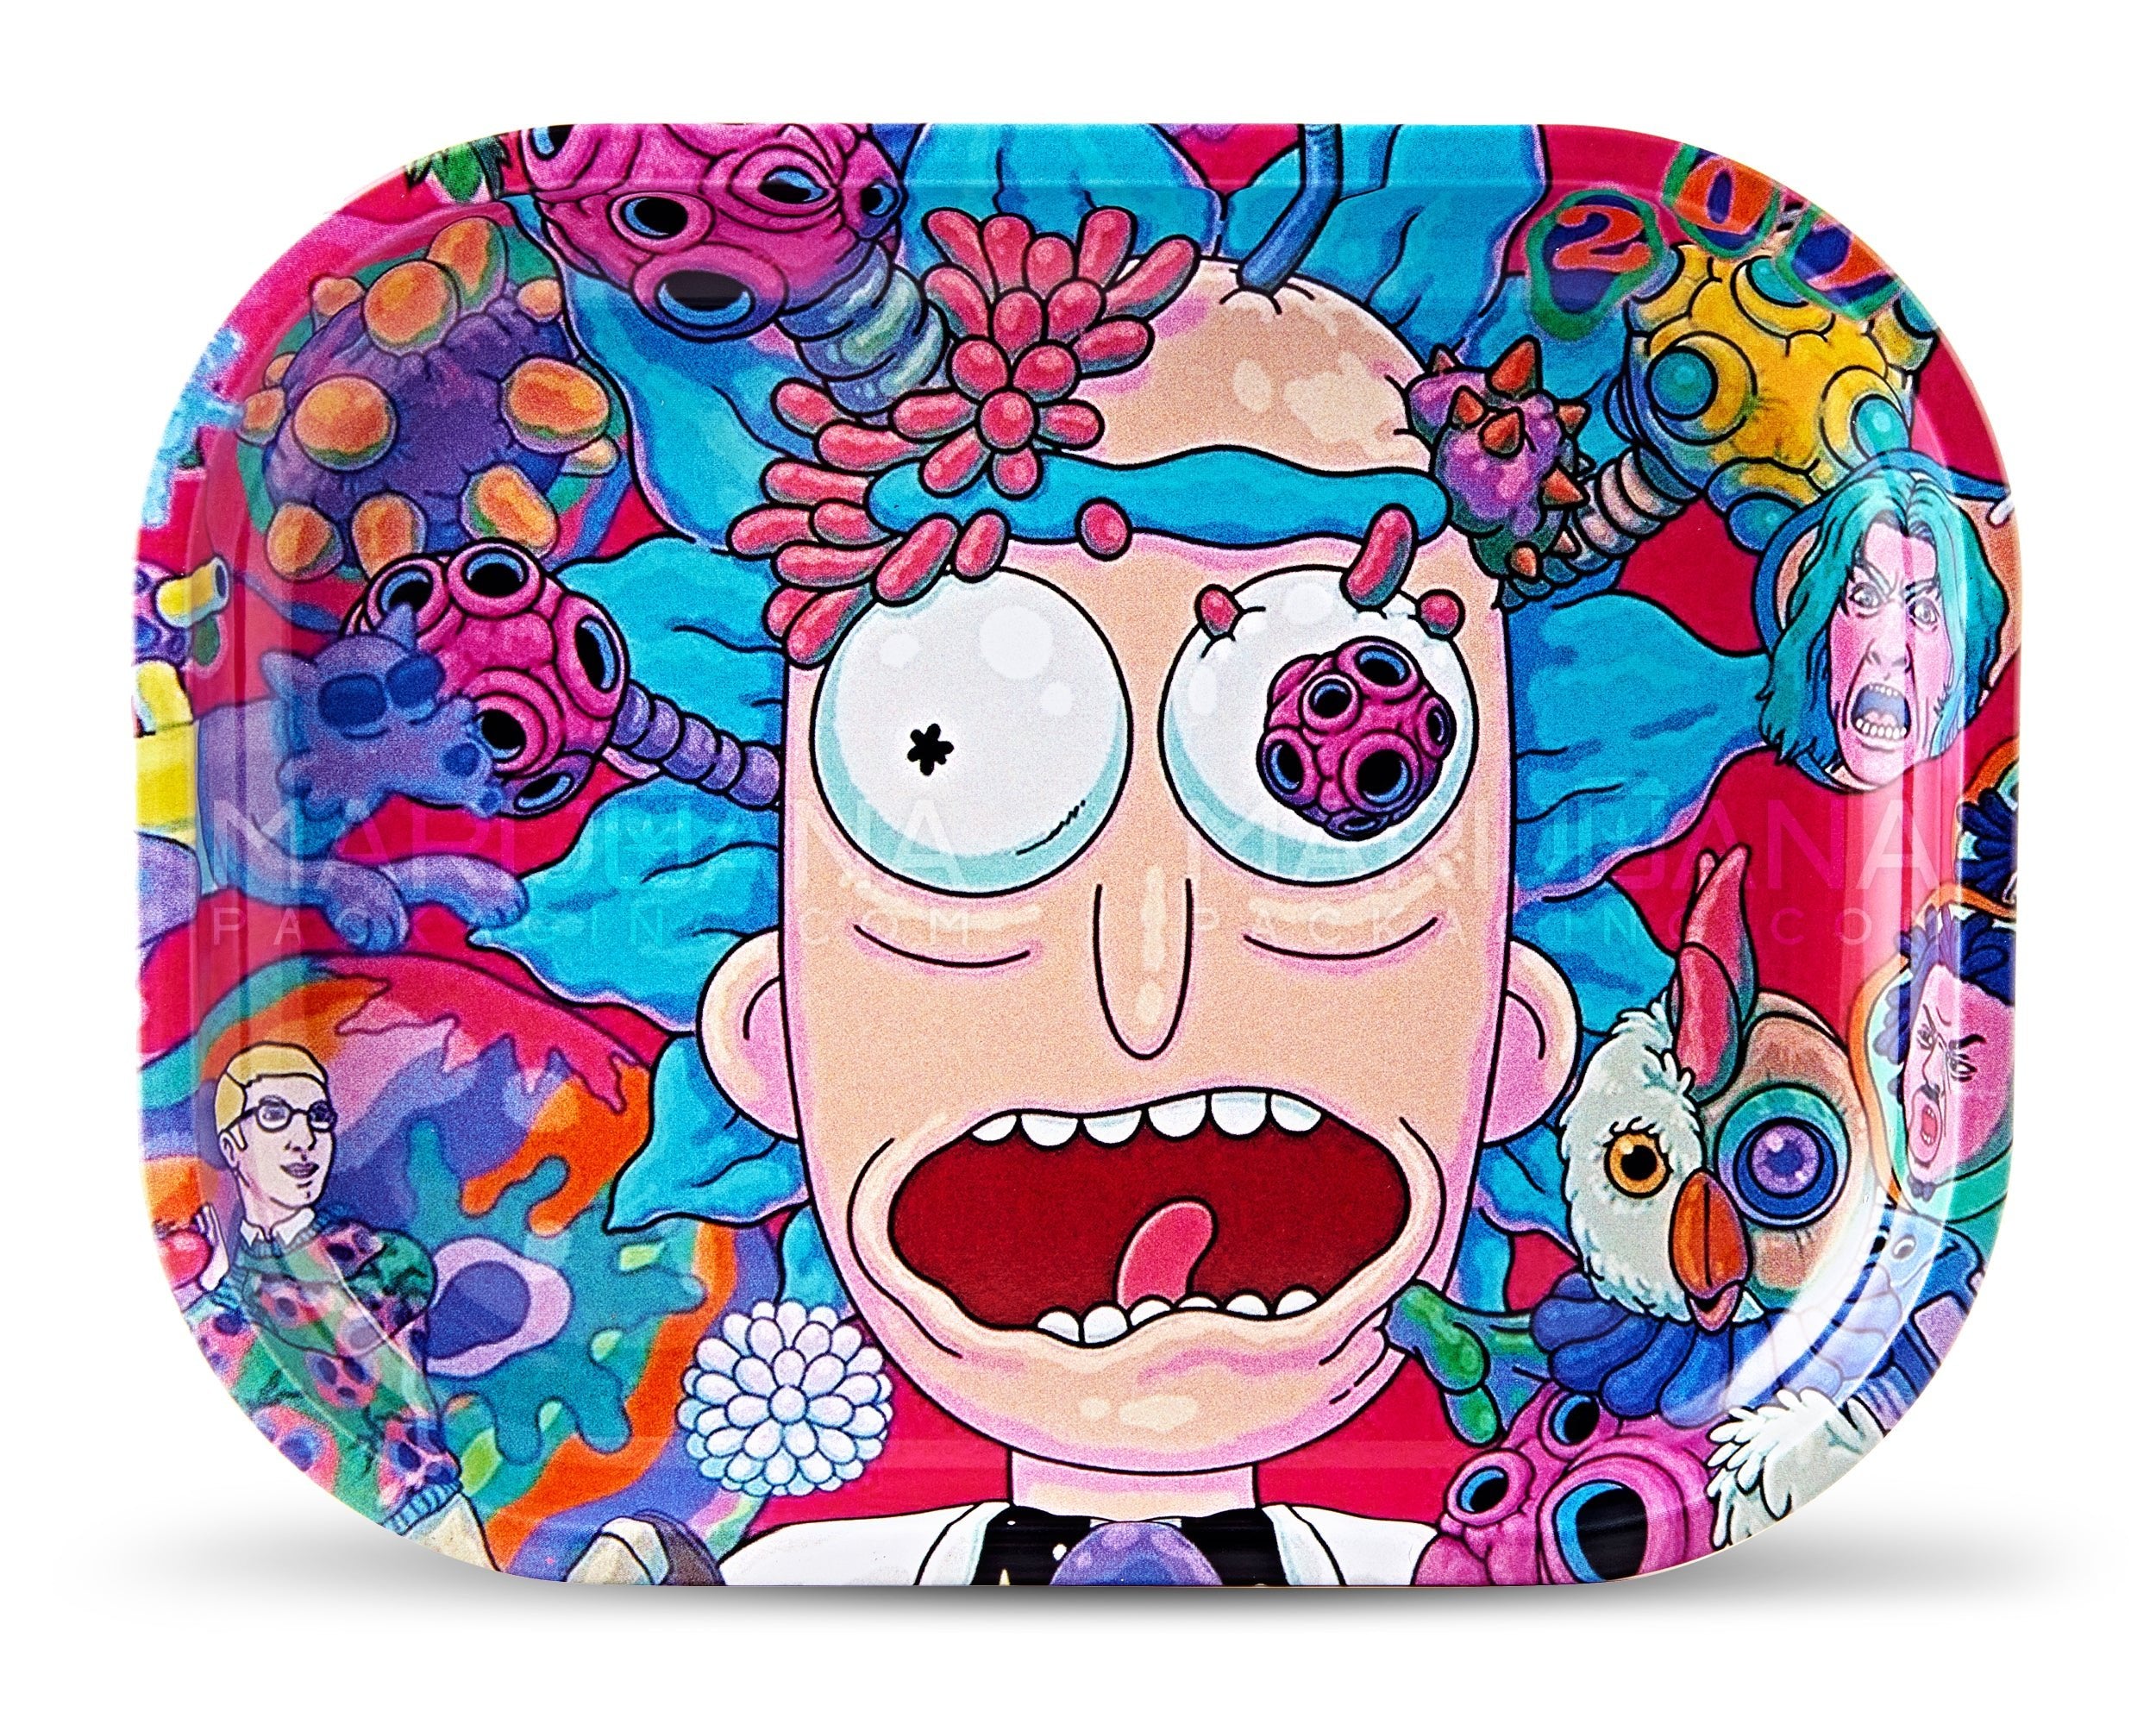 R&M Trippy Rolling Tray w/ Magnetic Cover | 7in x 5.5in - Mini - Metal - 2